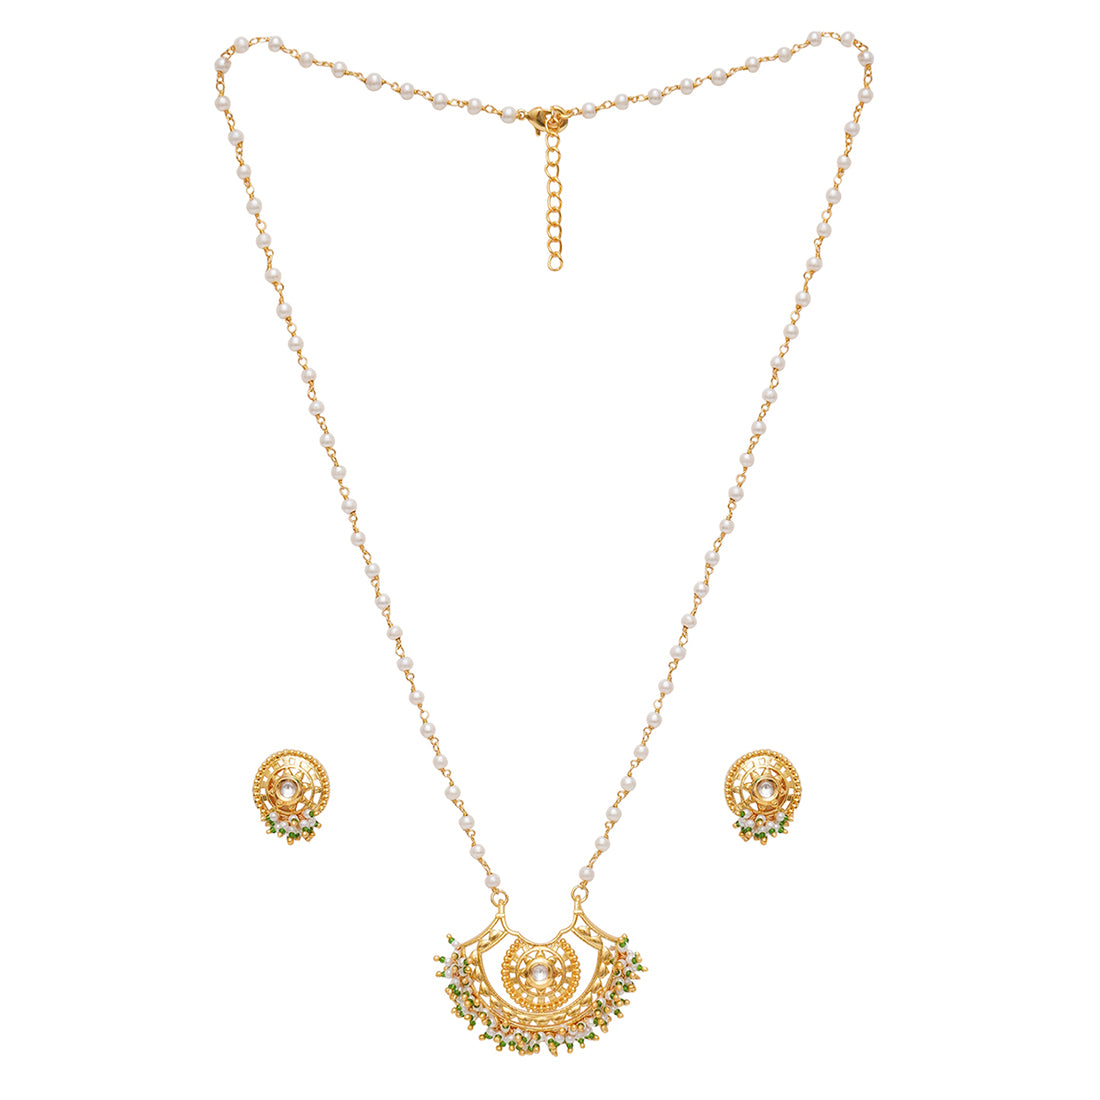 Festive Hues Long Jewellery Set in Gold and Pearl Chain